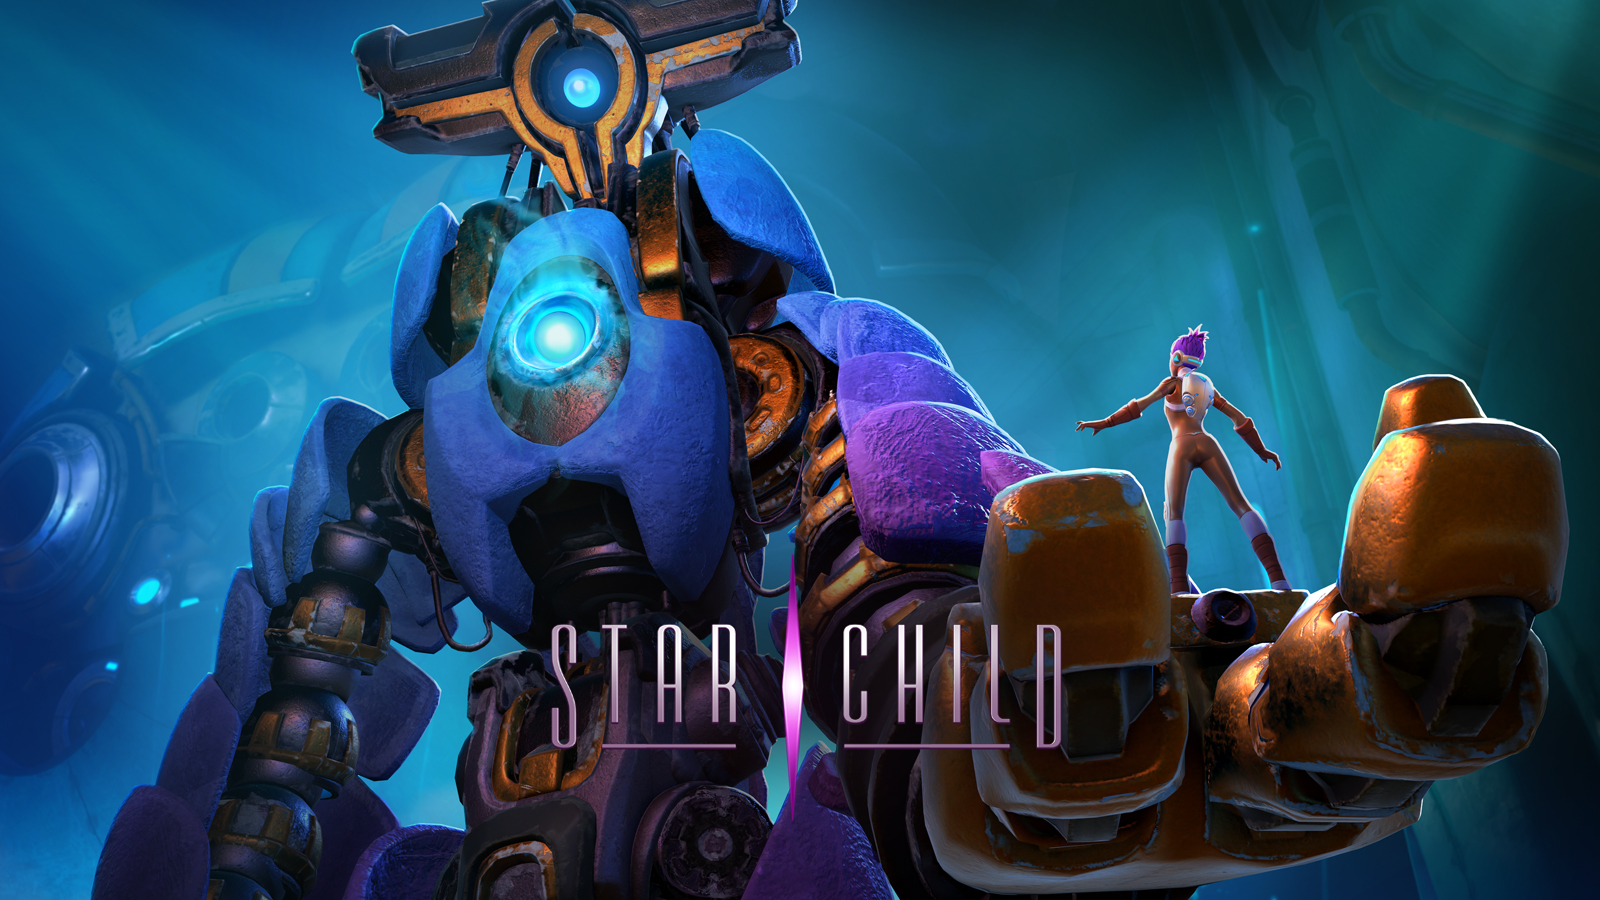 Star Child certainly seems like the kind of sci-fi IP that could be extended across media